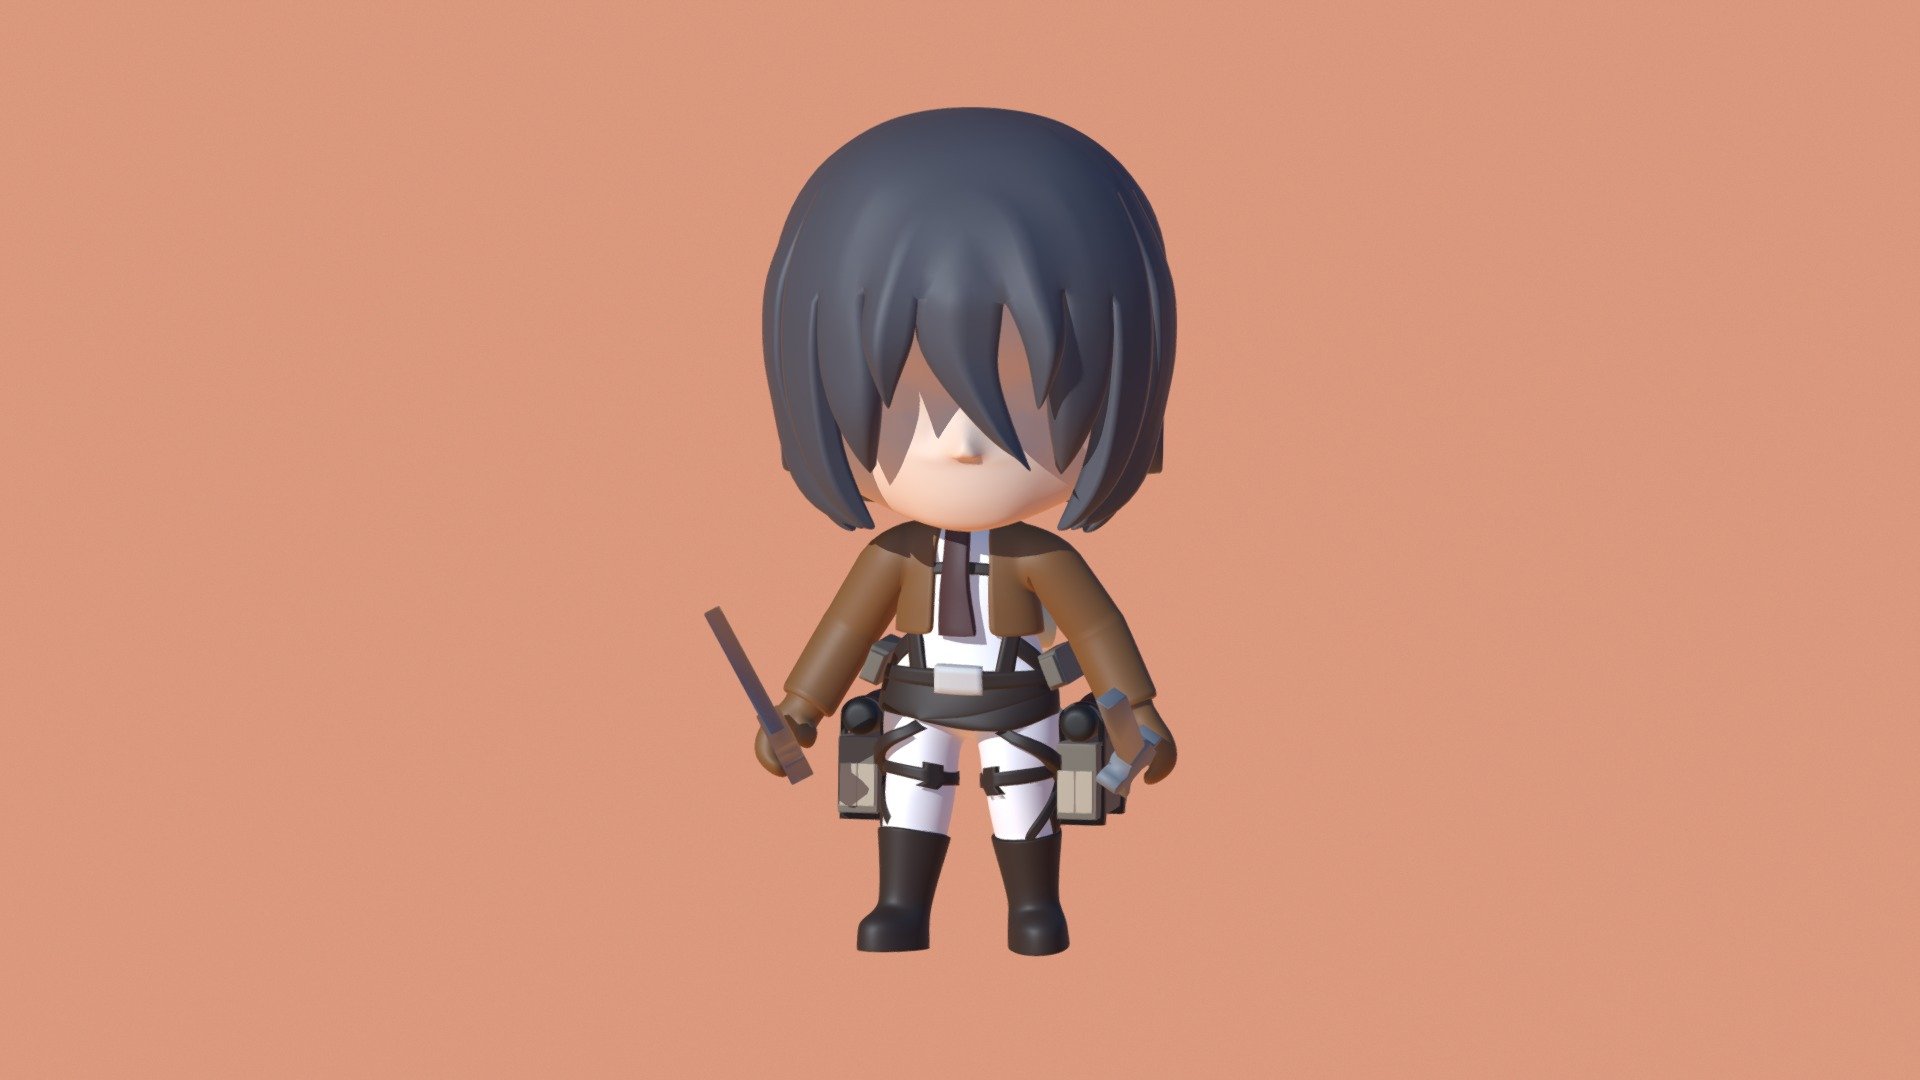 A model i was commsioned to make for 3D printing, still WIP - Mikasa Ackerman - SNK - Chibi - 3D model by Miaru3d 3d model